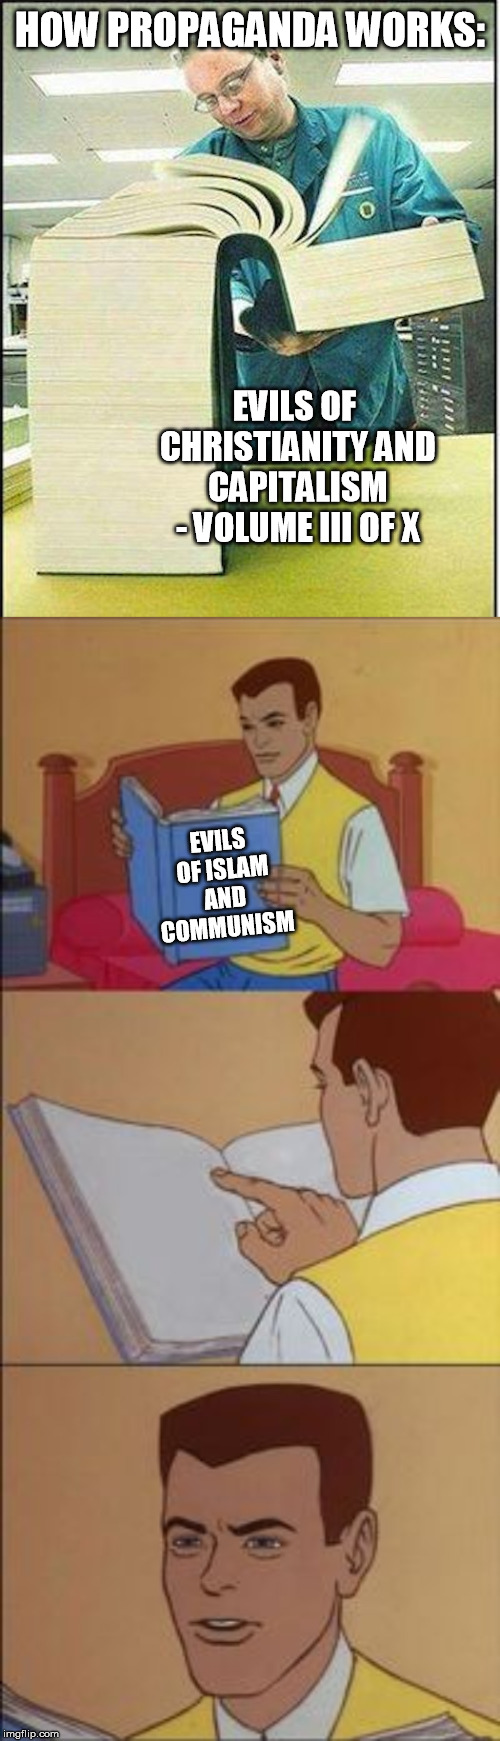 And the kicker is your textbooks will cost you thousands of dollars. | HOW PROPAGANDA WORKS:; EVILS OF CHRISTIANITY AND CAPITALISM - VOLUME III OF X; EVILS OF ISLAM AND COMMUNISM | image tagged in big book,peter parker reading a book,propaganda,public school,college tuition | made w/ Imgflip meme maker